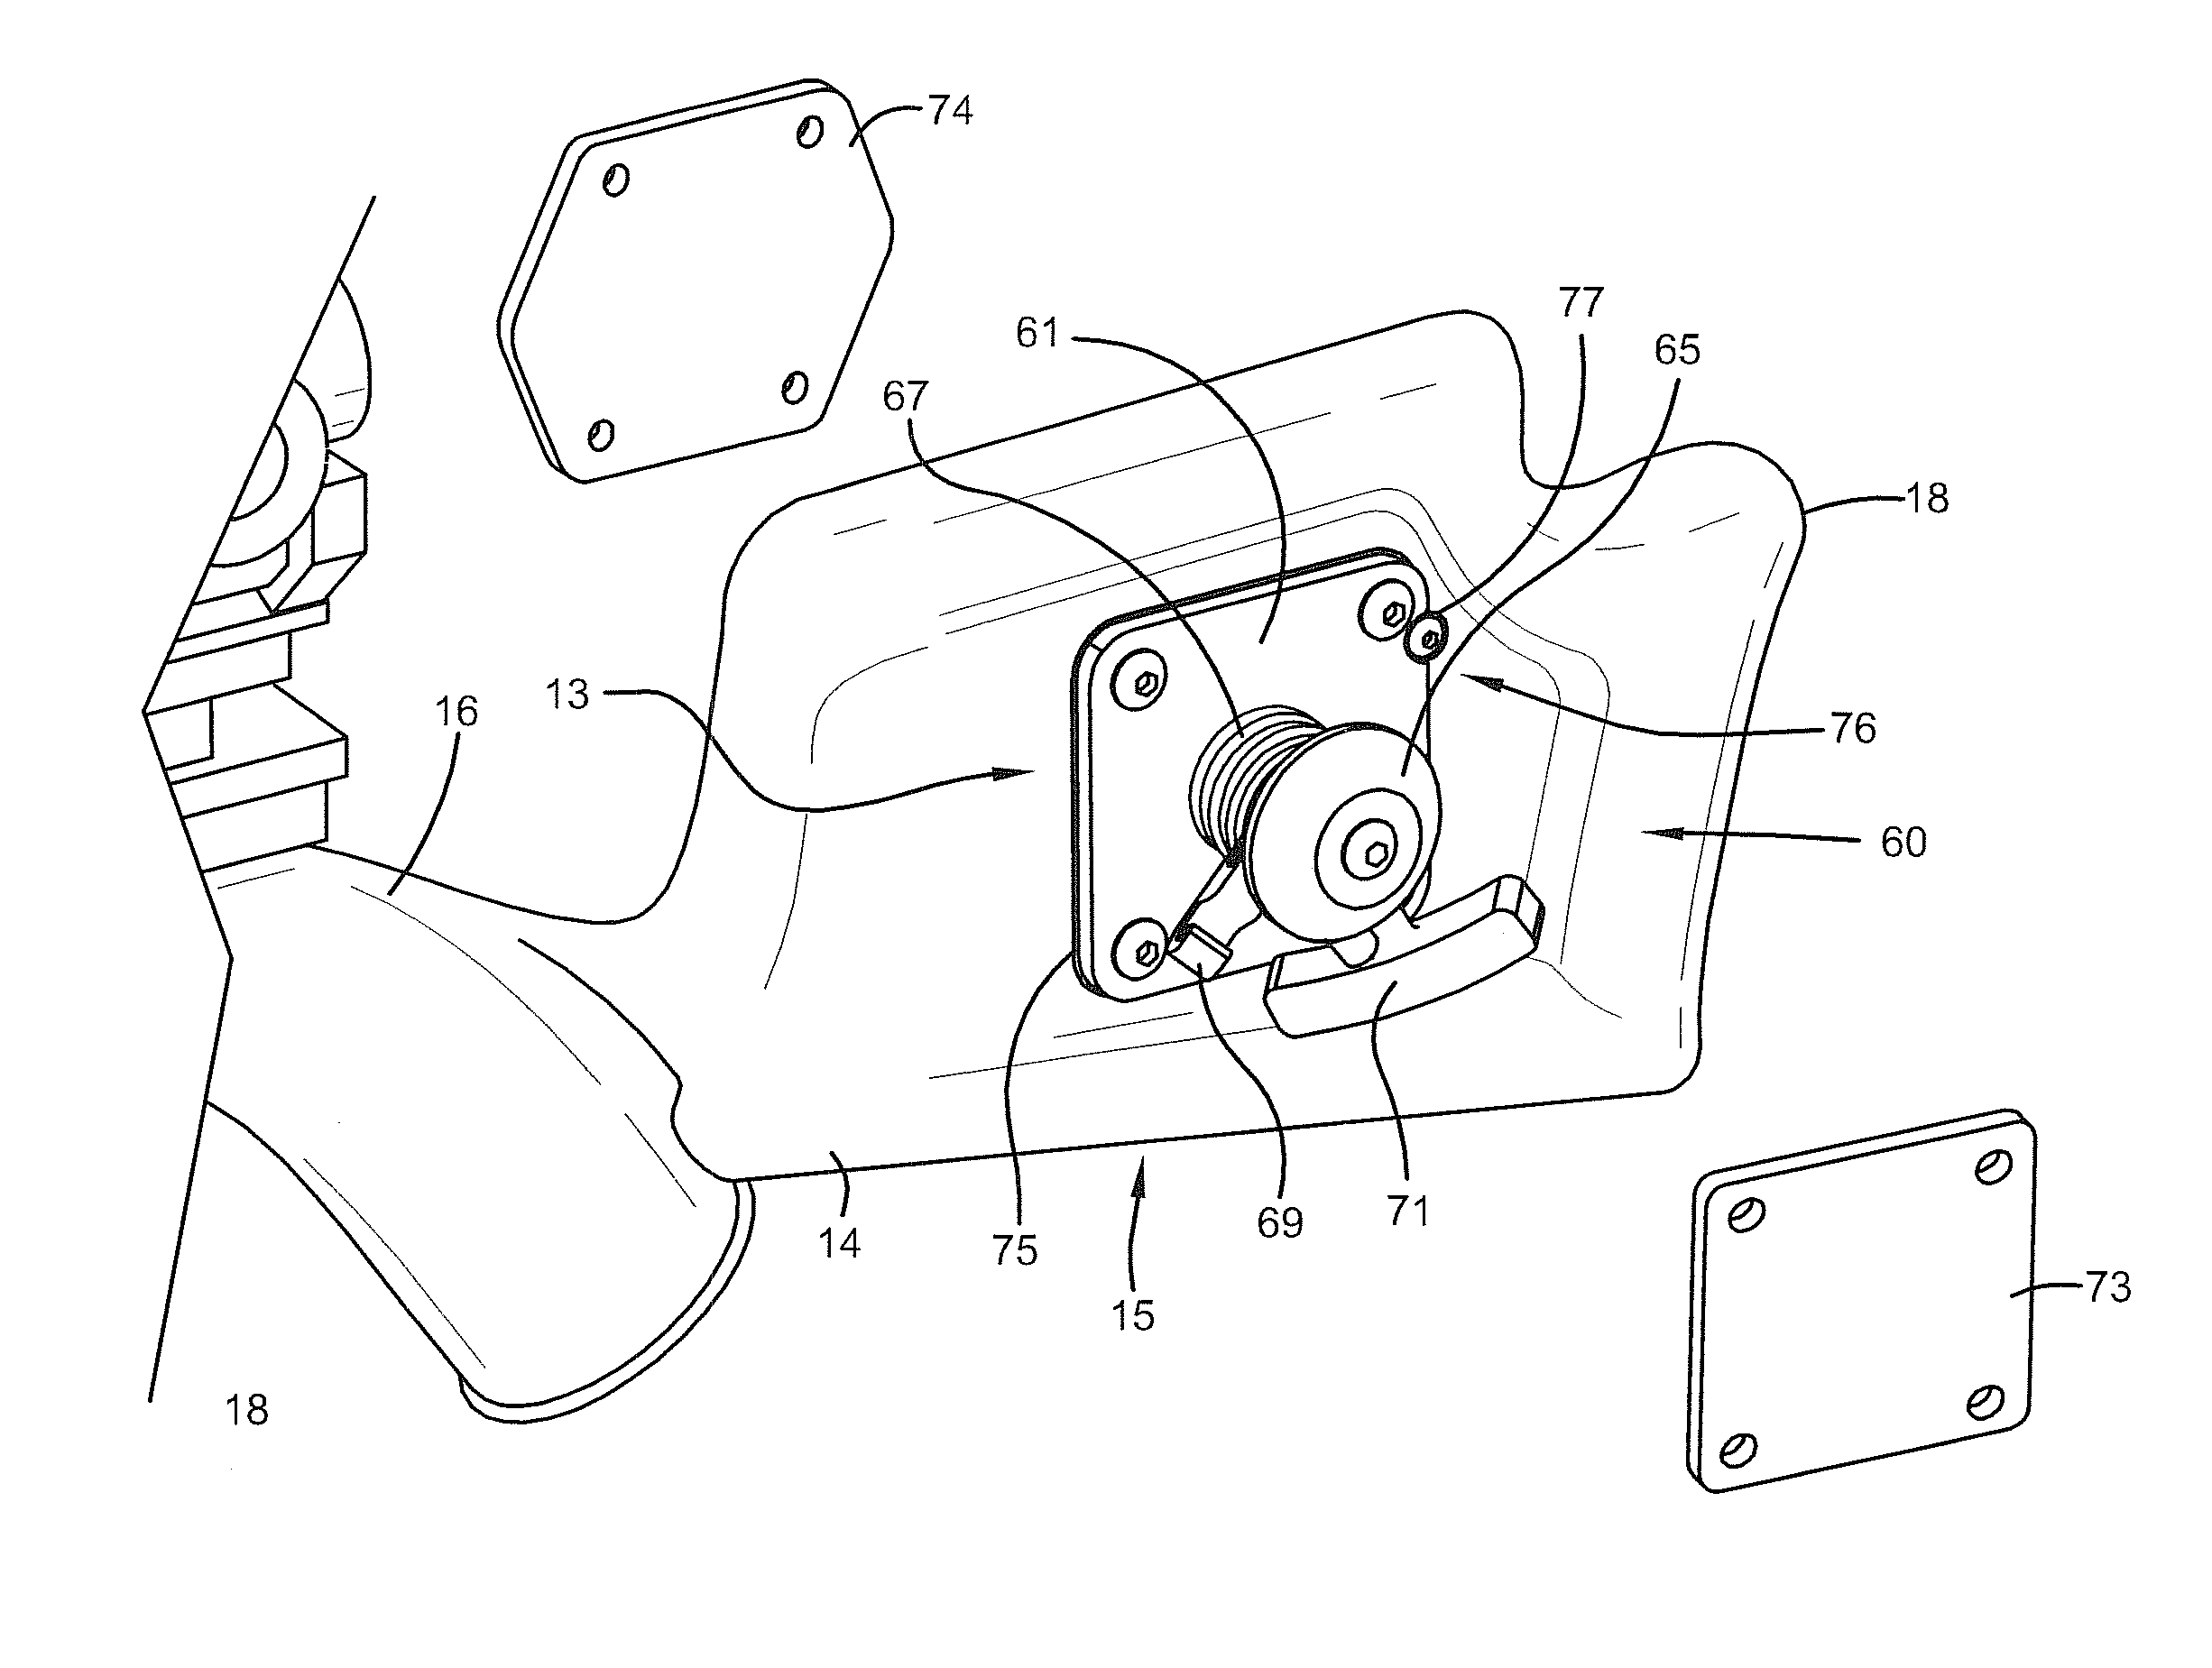 Integrated cocking device